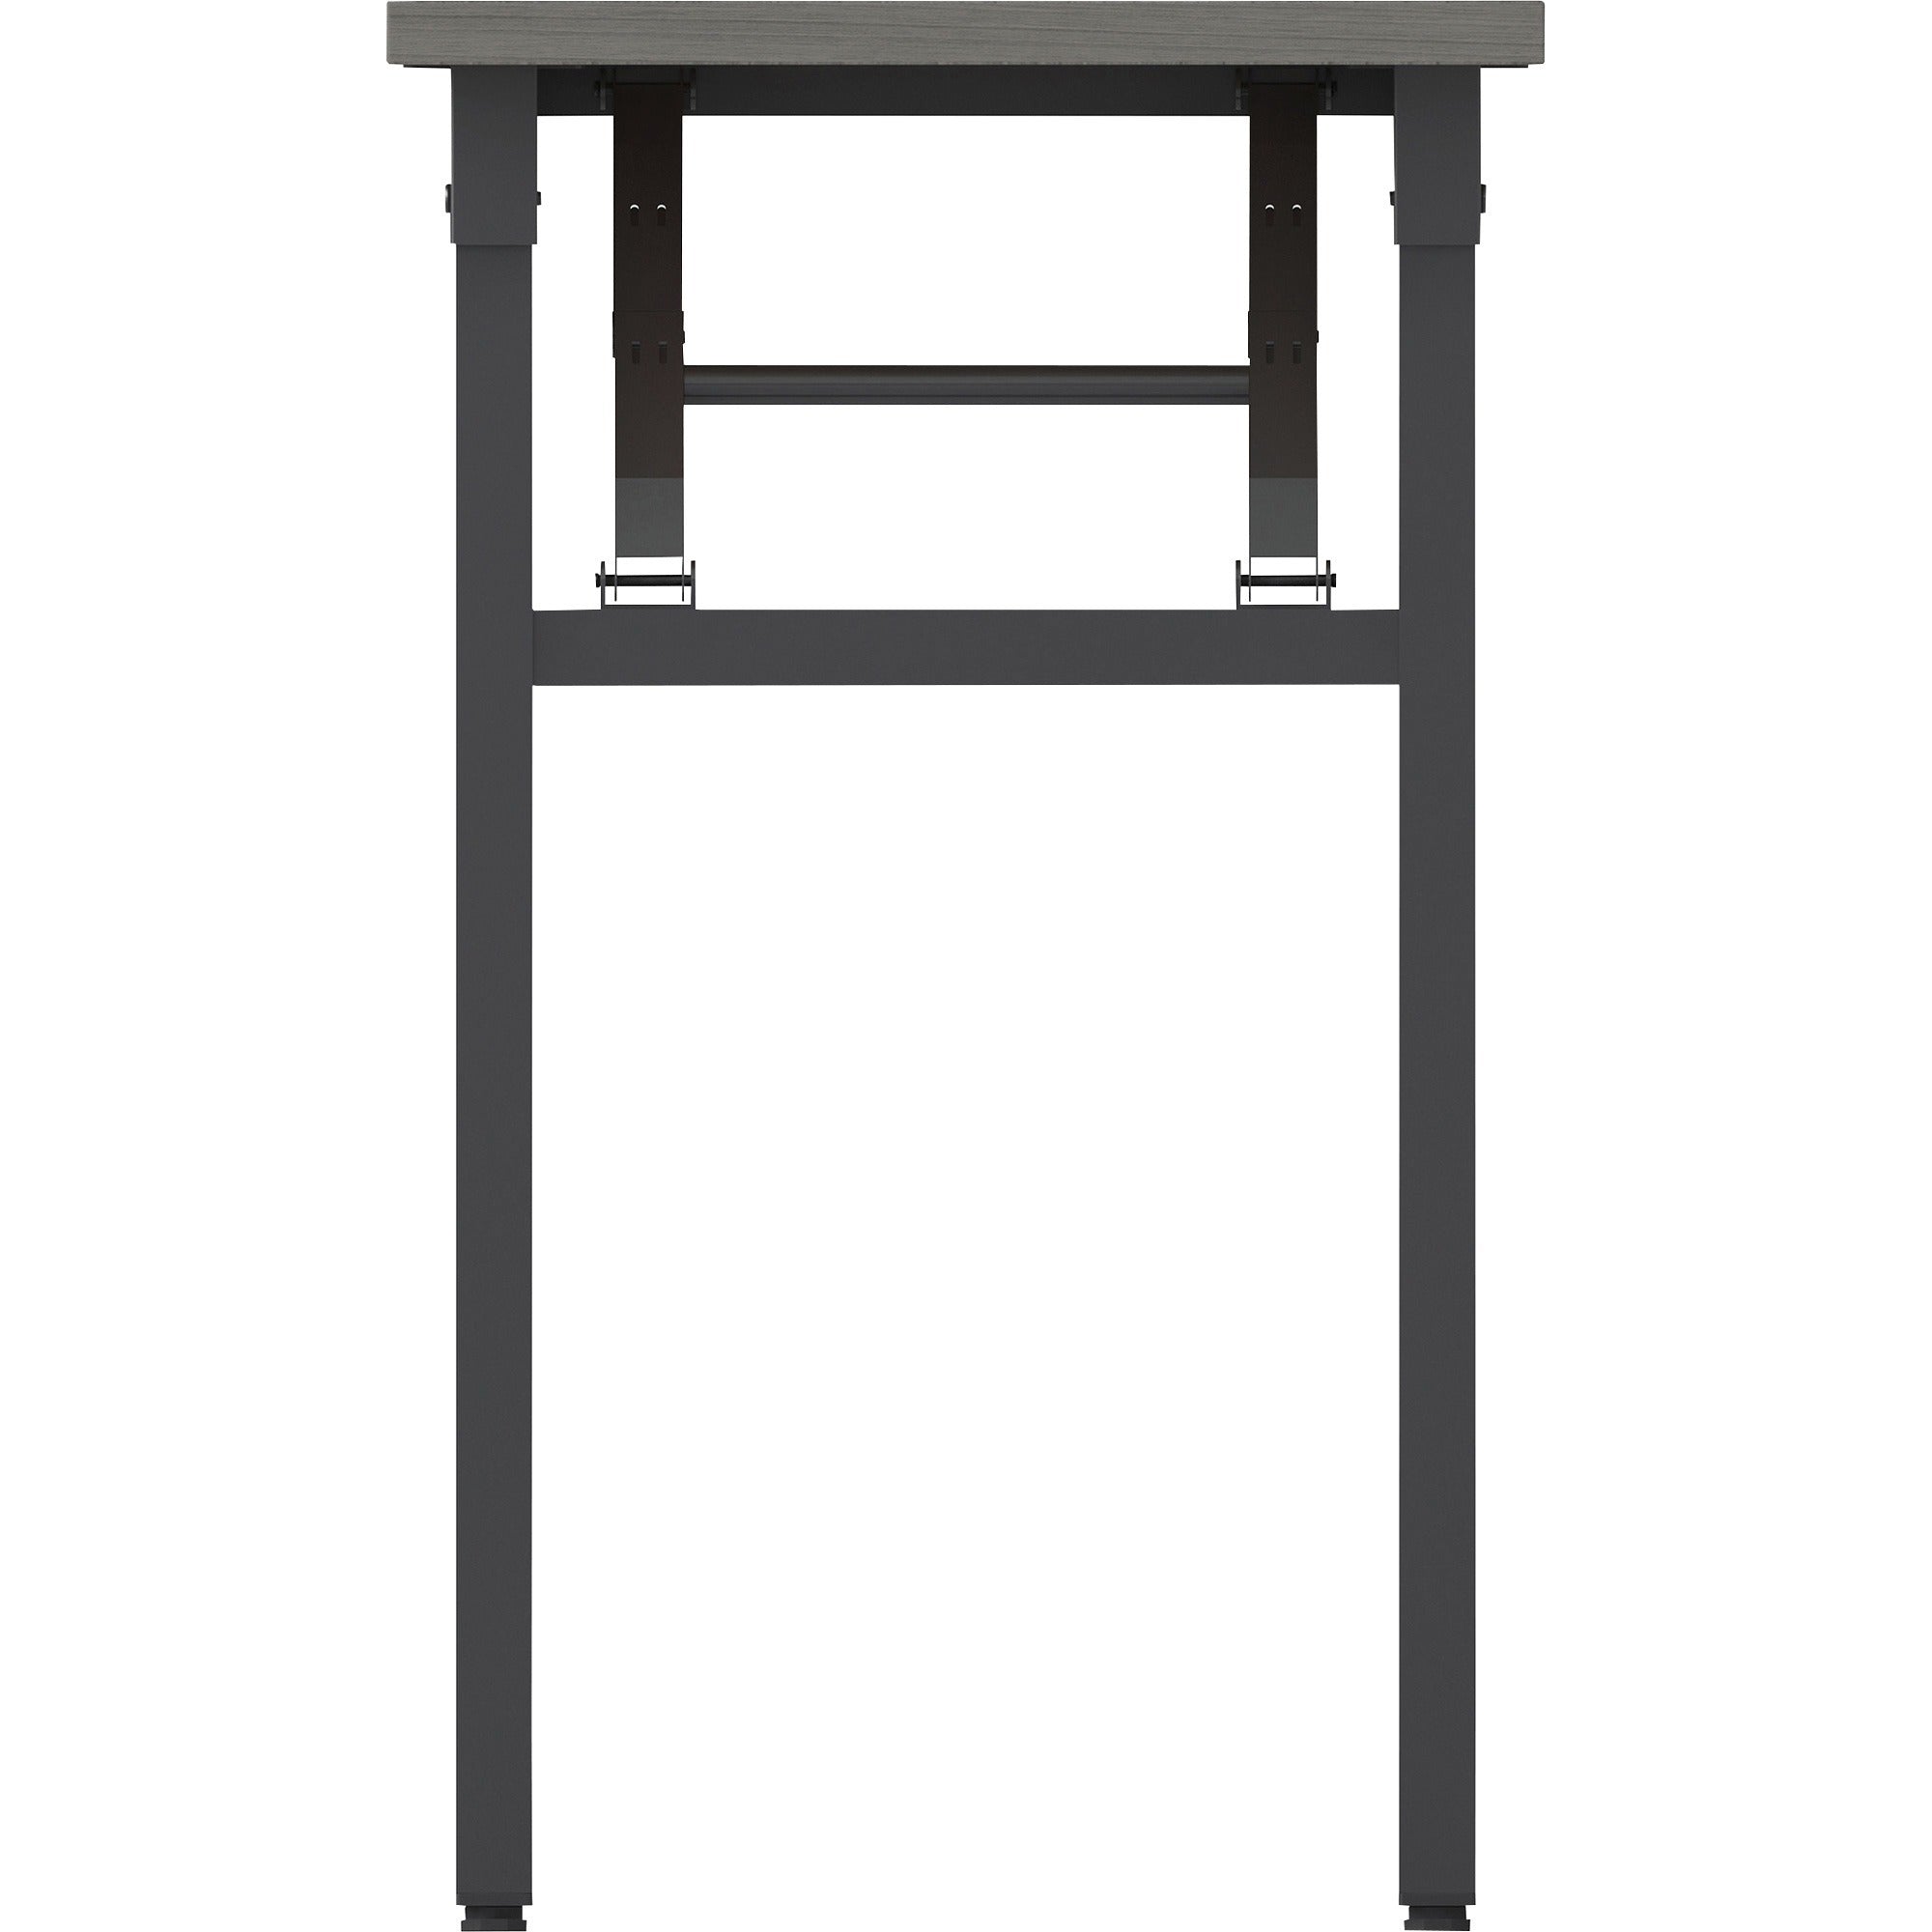 lorell-folding-training-table-for-table-topmelamine-top-x-60-table-top-width-x-18-table-top-depth-x-1-table-top-thickness-30-height-assembly-required-gray-1-each_llr60746 - 5